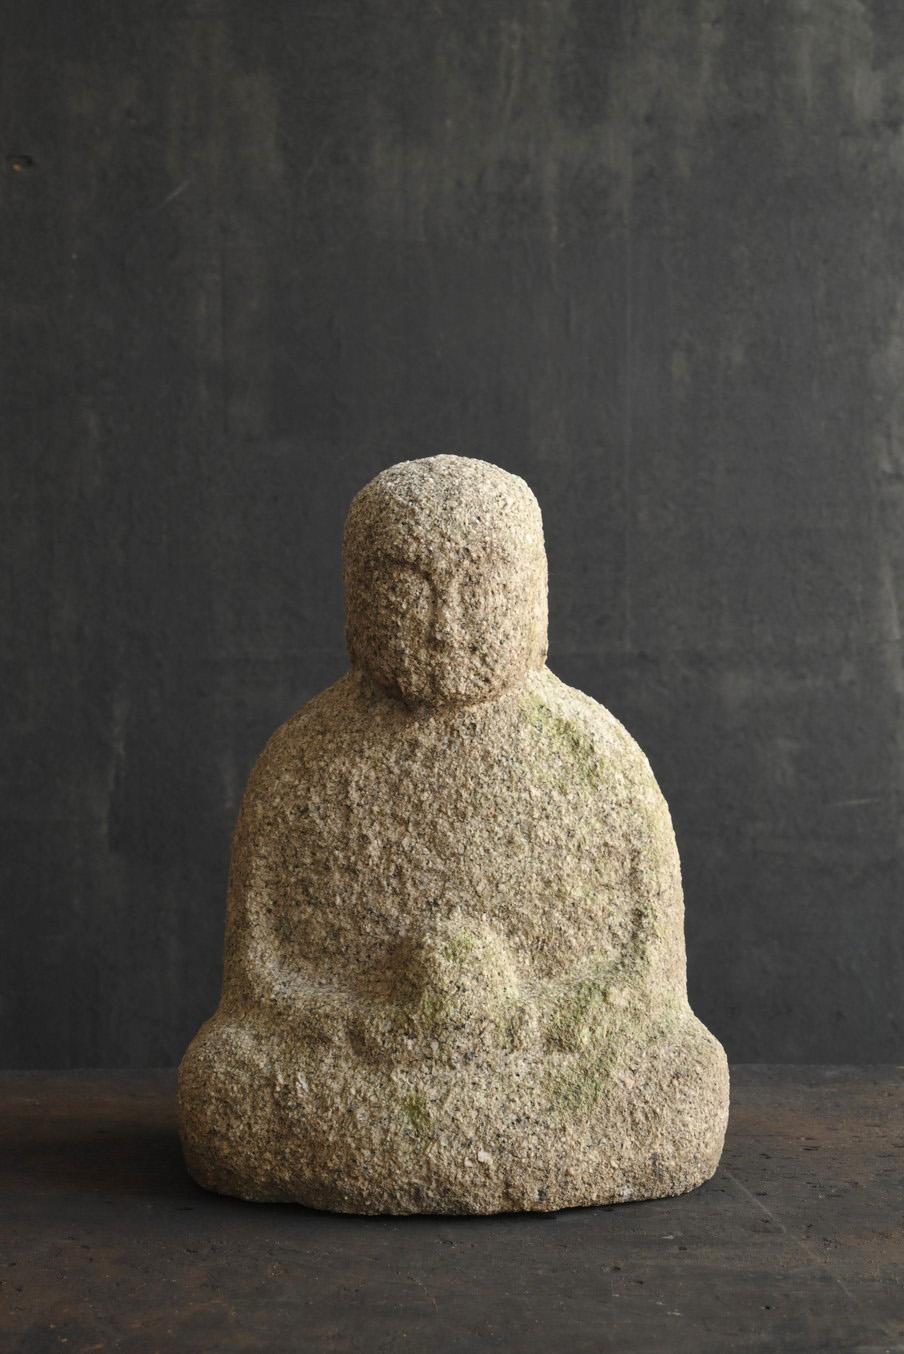 This is a stone Buddha made from the middle to late Edo period in Japan.
It depicts Jizo Bodhisattva sitting.

Most stone Buddhas are made of granite, and others are made of andesite or sandstone.
This Jizo Bodhisattva is made of granite.
Over the